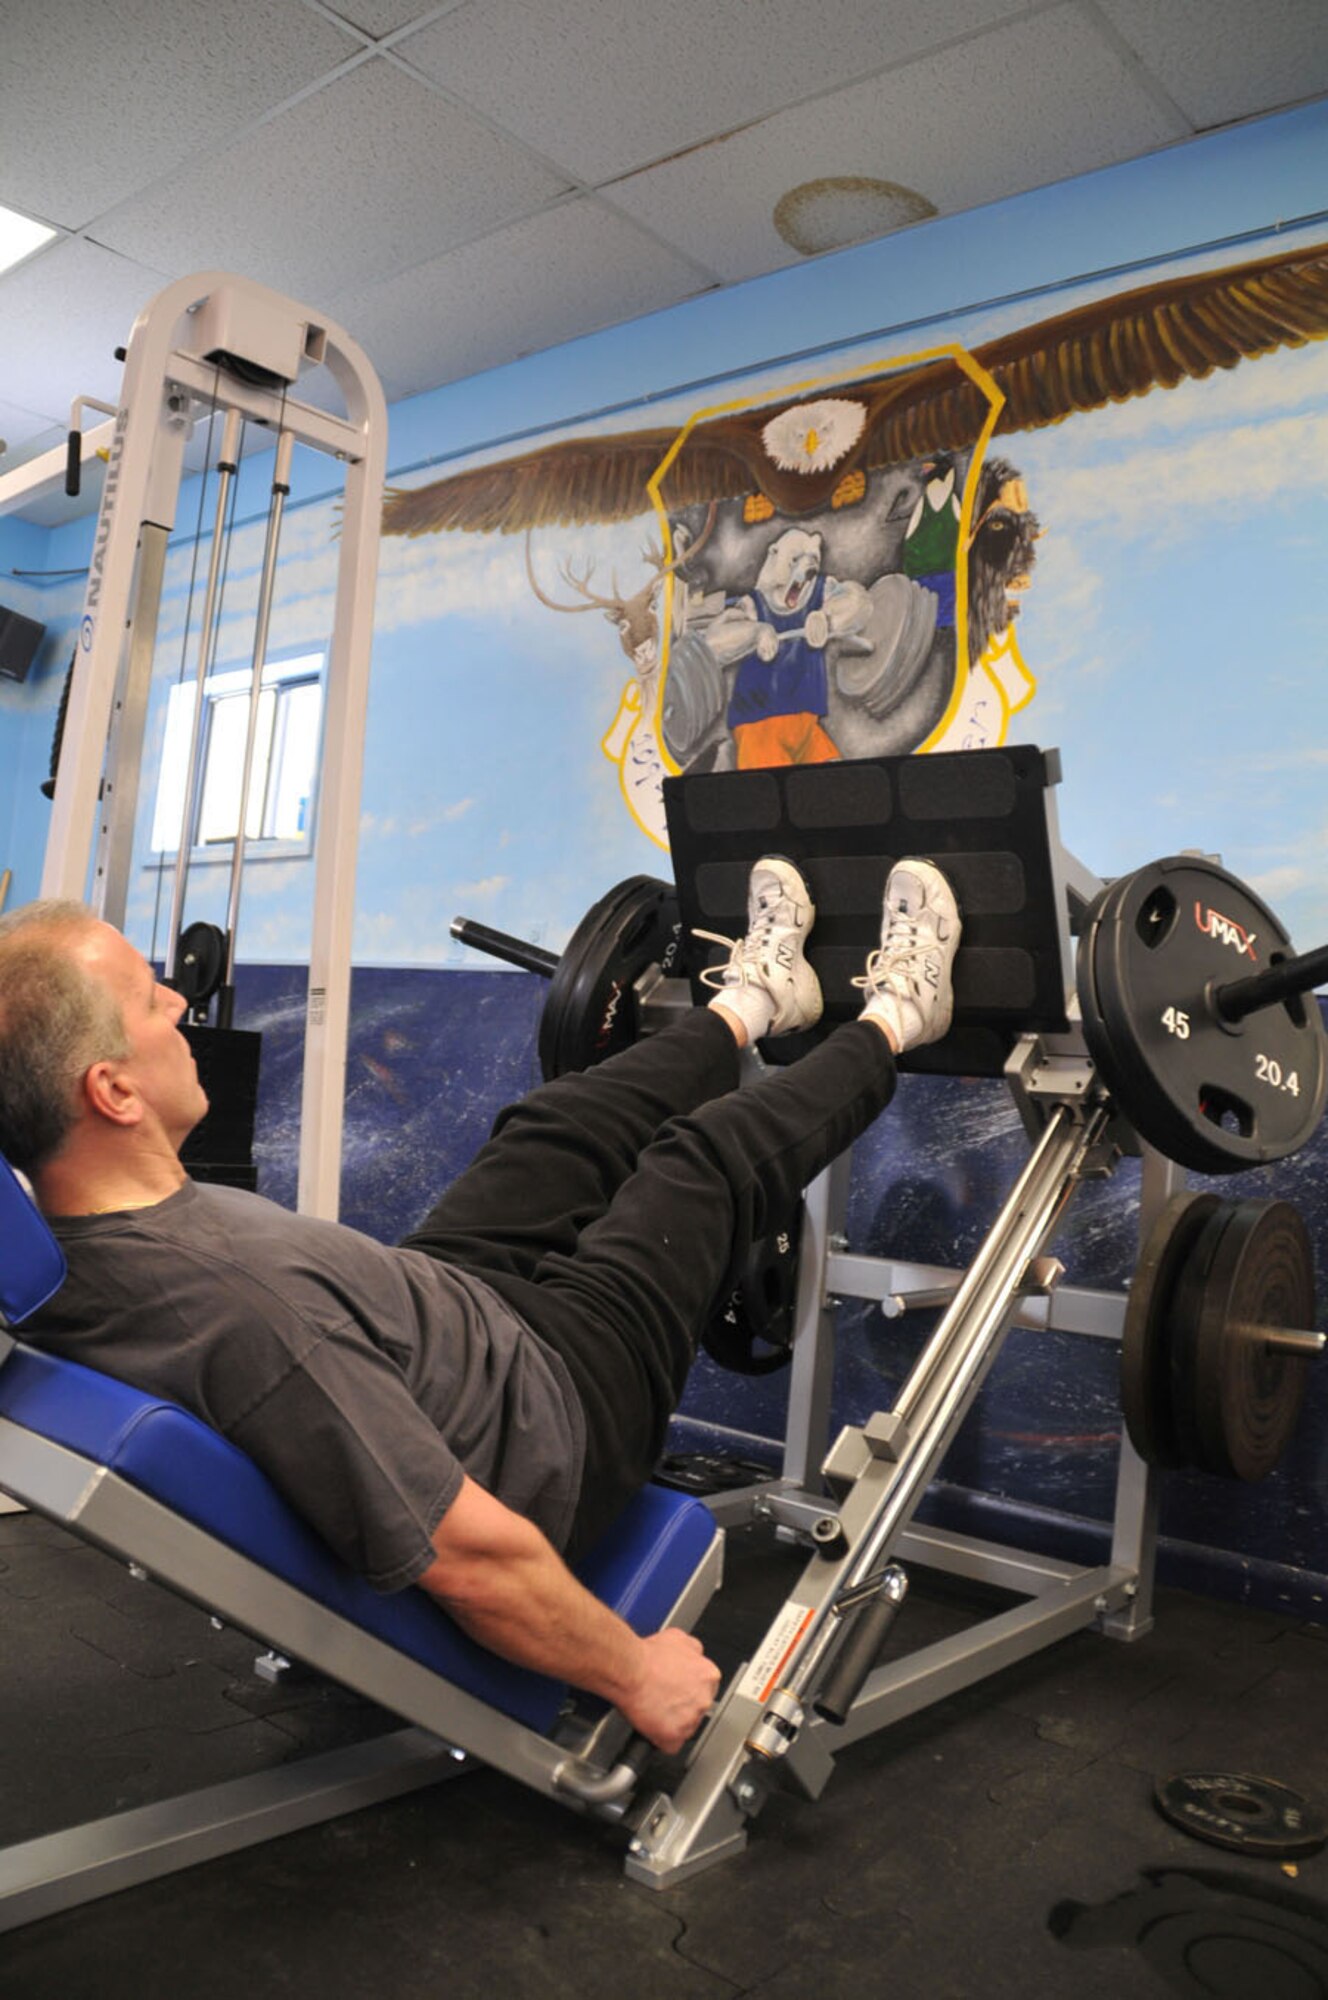 Senior Master Sgt. Chuck Muscato uses the leg press in the base gym. The leg press is just one of many new pieces of weight equipment at the gym now.